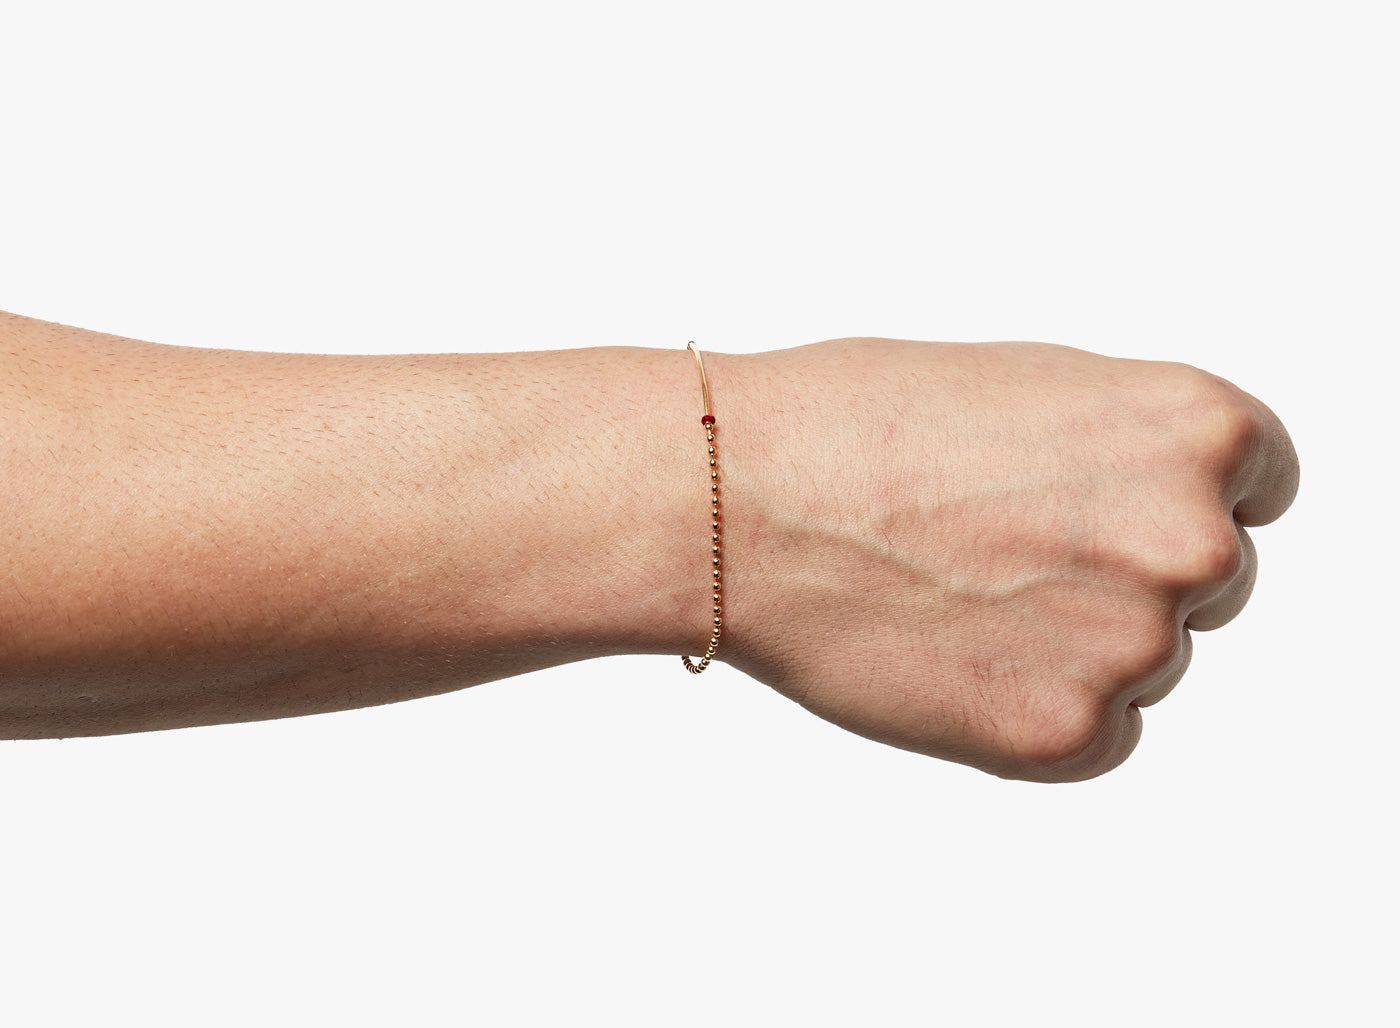 18K SOLID BAR W/ RUBY BRACELET 357: an 18k gold bar connects to a single red ruby and an 18k gold ball chain